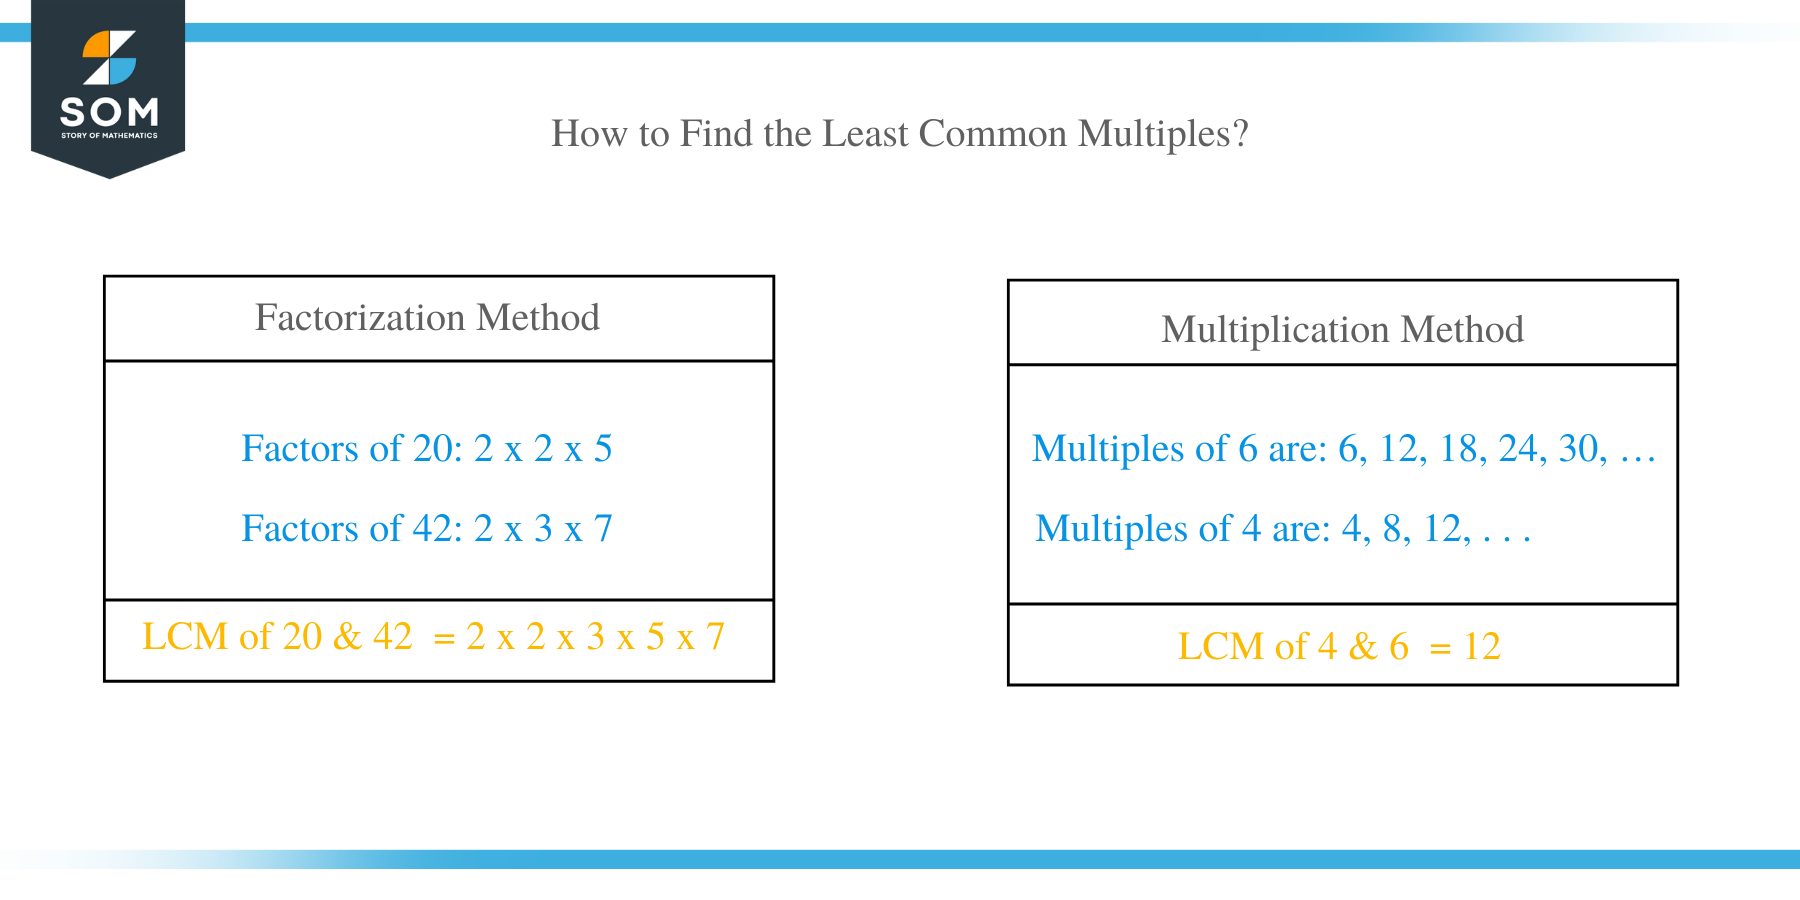 How to Find the Least Common Multiples?